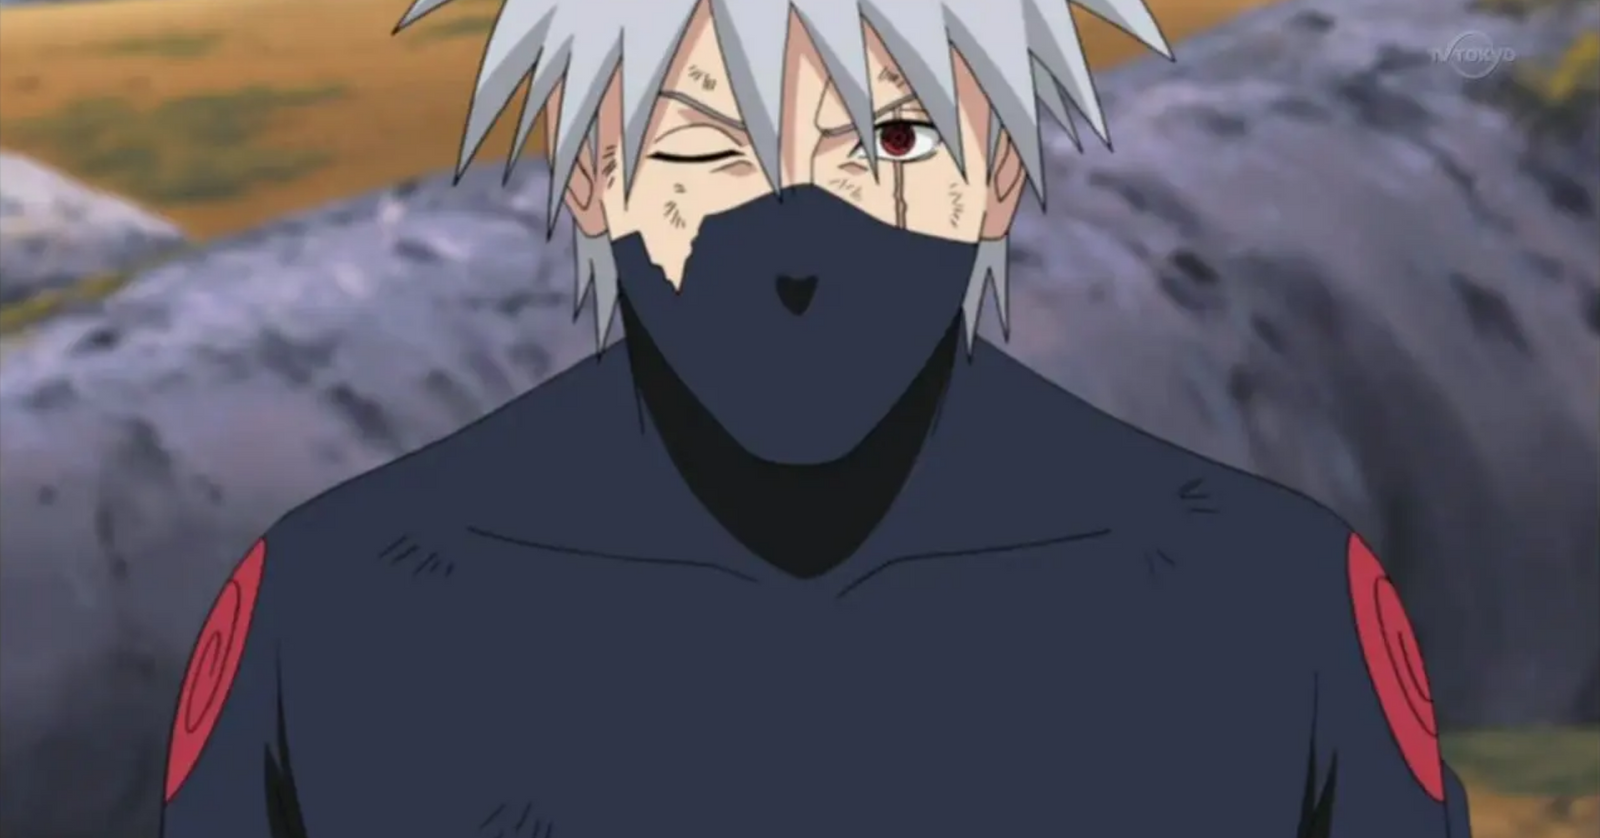 Why Does Kakashi Wear A Mask In The Naruto Series